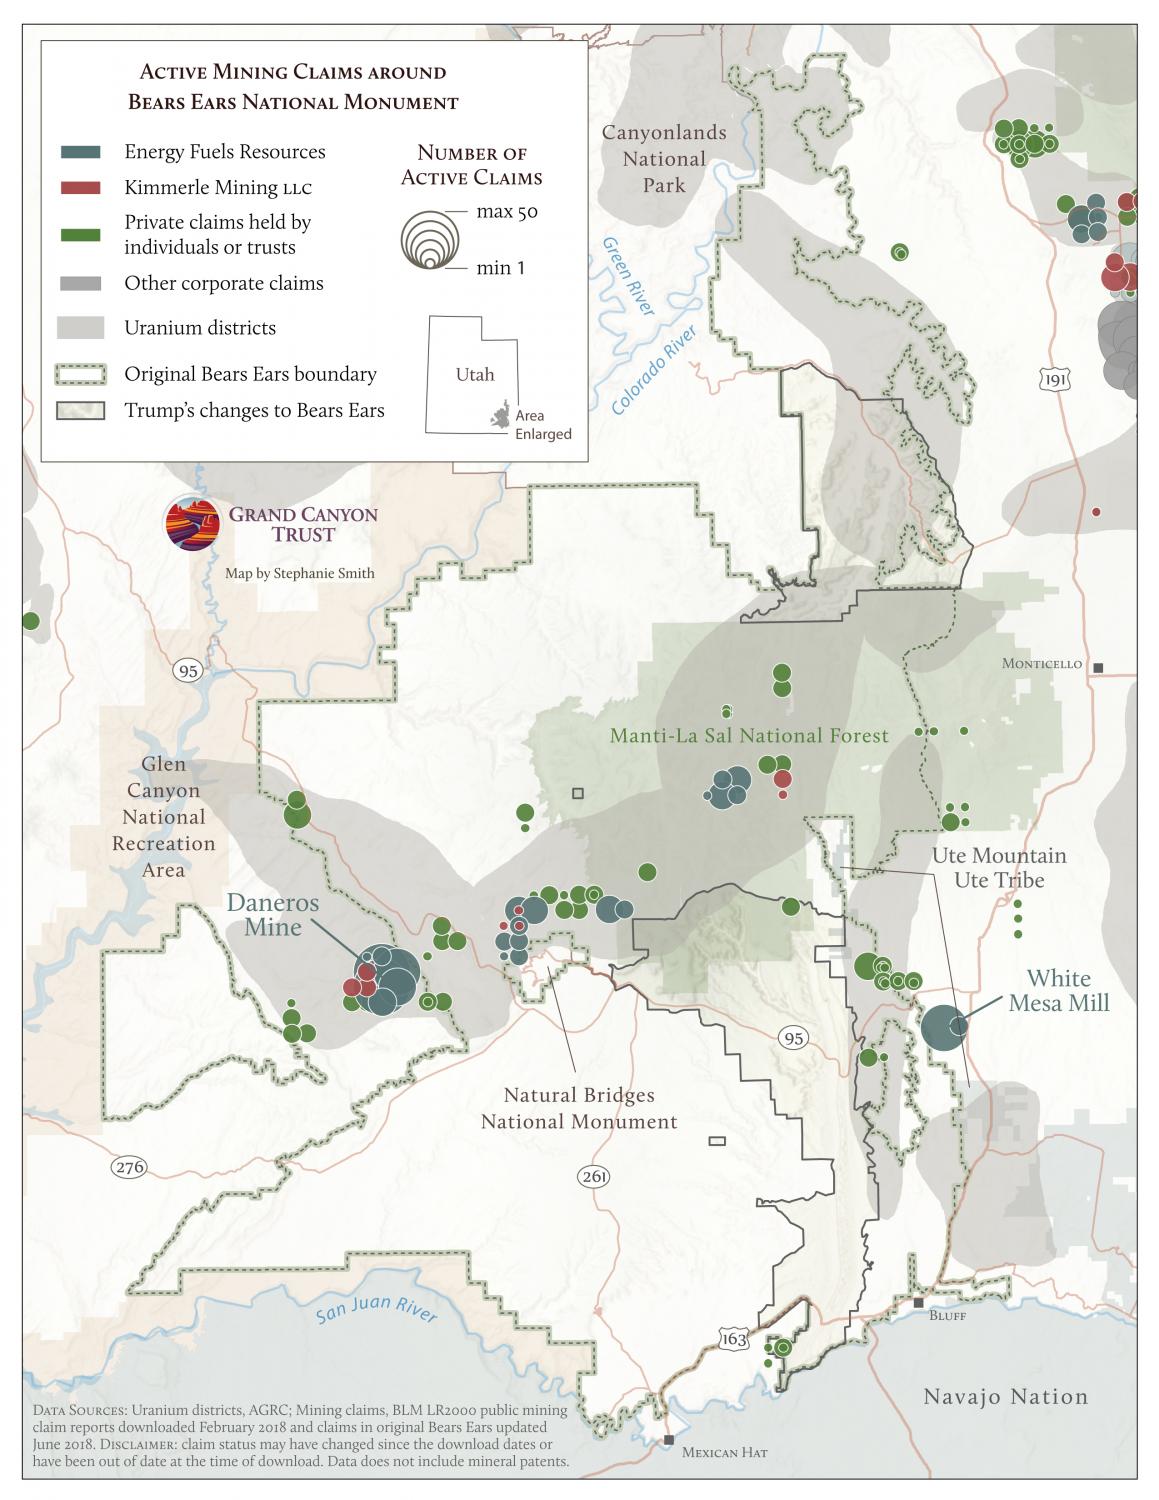 Map of active mining claims around Bears Ears with ownership data